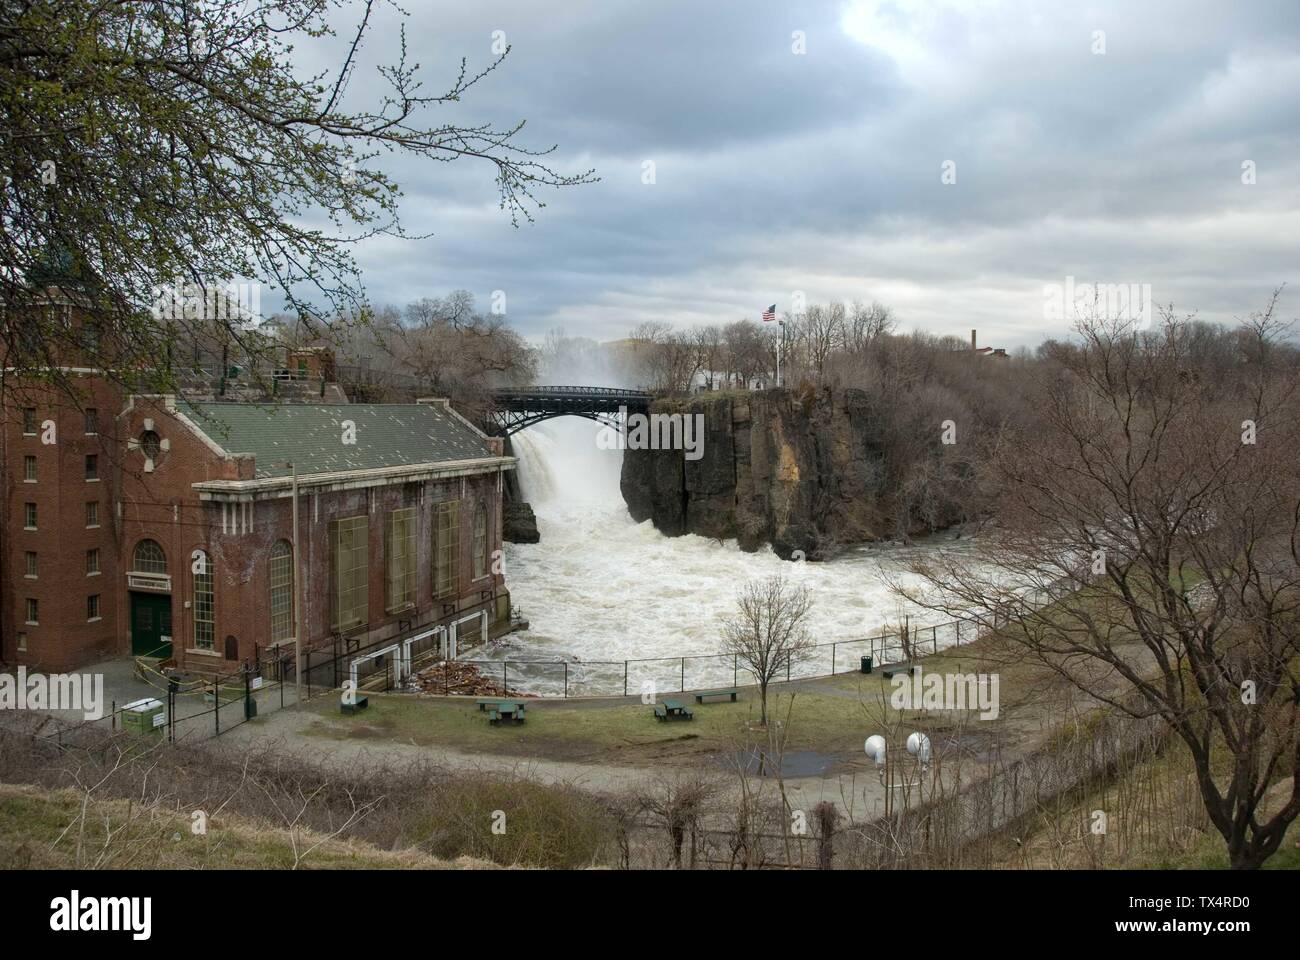 Great Falls of the Passaic River after 8 inches (200 mm) of rain drenched Northern New Jersey the second week of April 2007.; Taken onÂ 18 April 2007; Own work; Den Spiess; Stock Photo